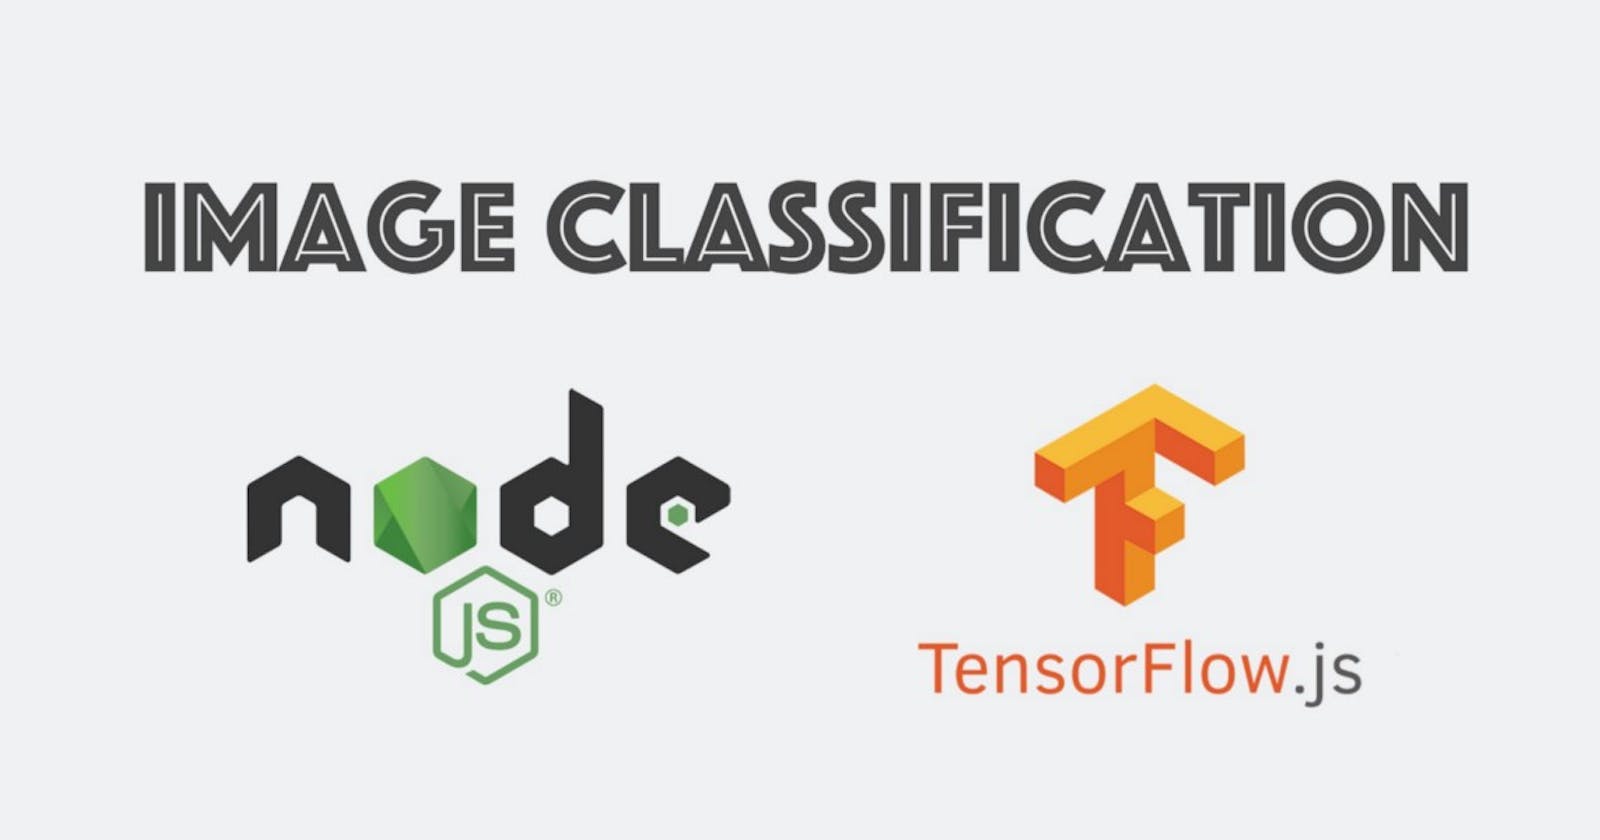 How to implement a custom classification application with Tensorflow Javascript